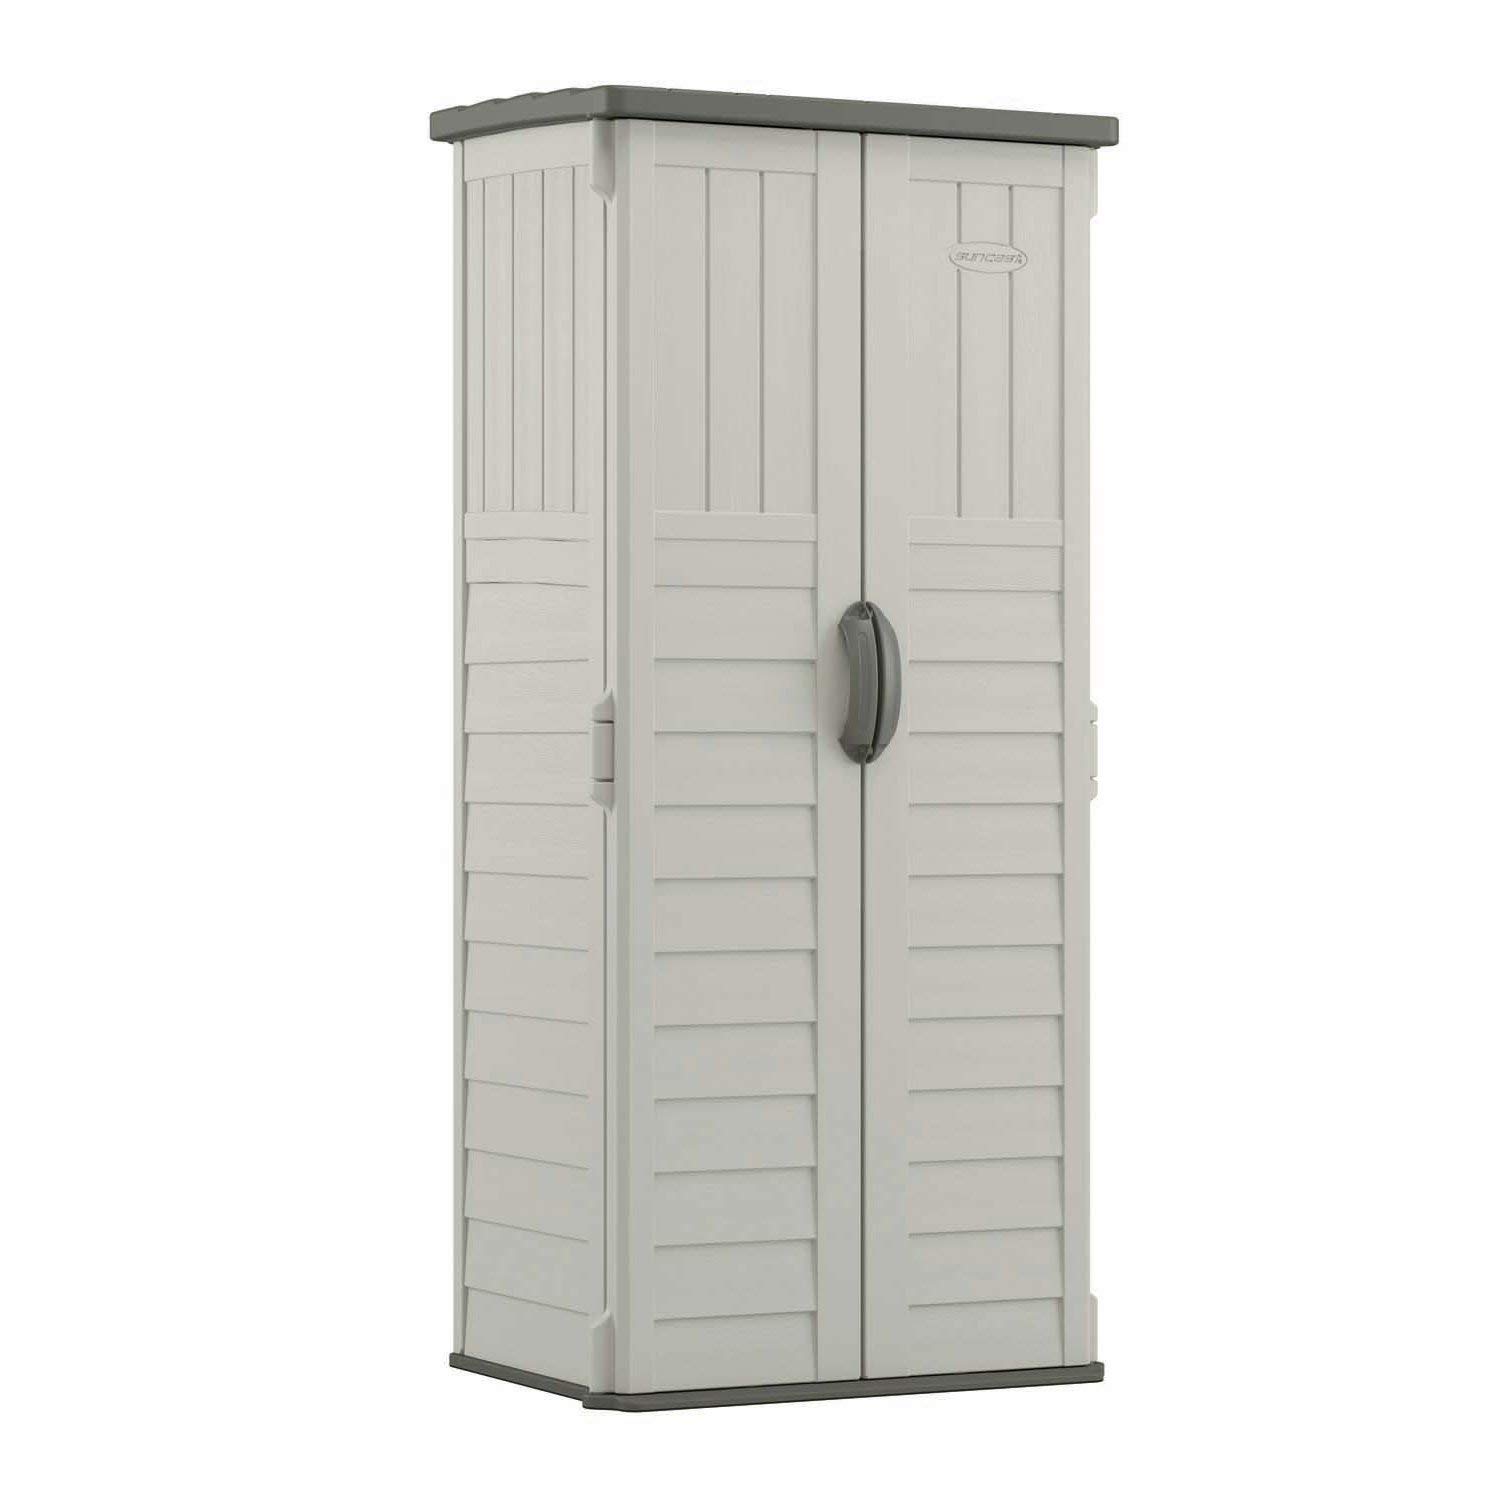 Suncast 22 cu. ft. Vertical Resin Storage Shed for Backyard and Patio, Light Taupe $149